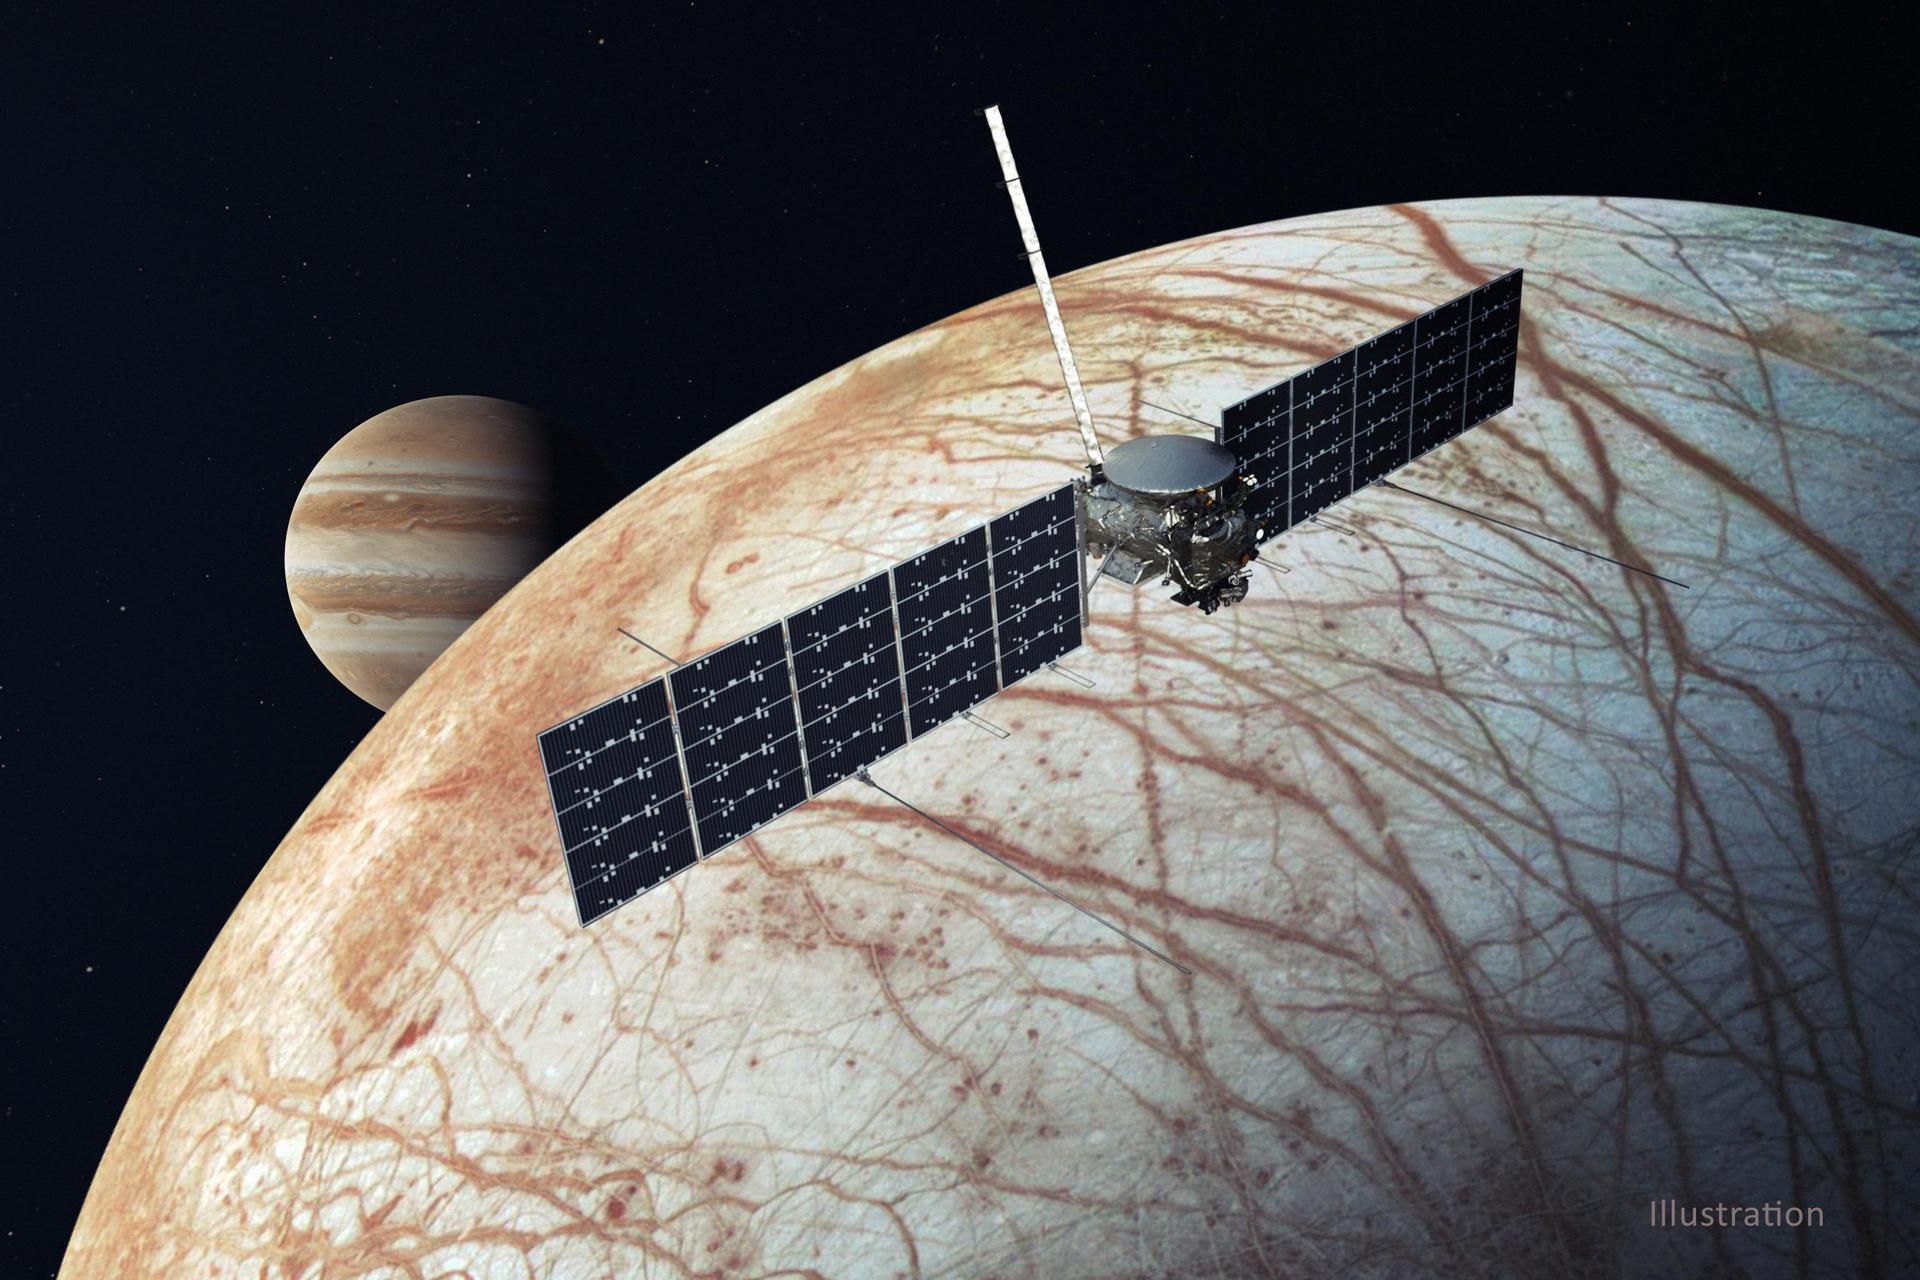 NASA Awards SpaceX Contract To Launch Europa Clipper Aboard Falcon Heavy Towards Jupiter's Icy Moon